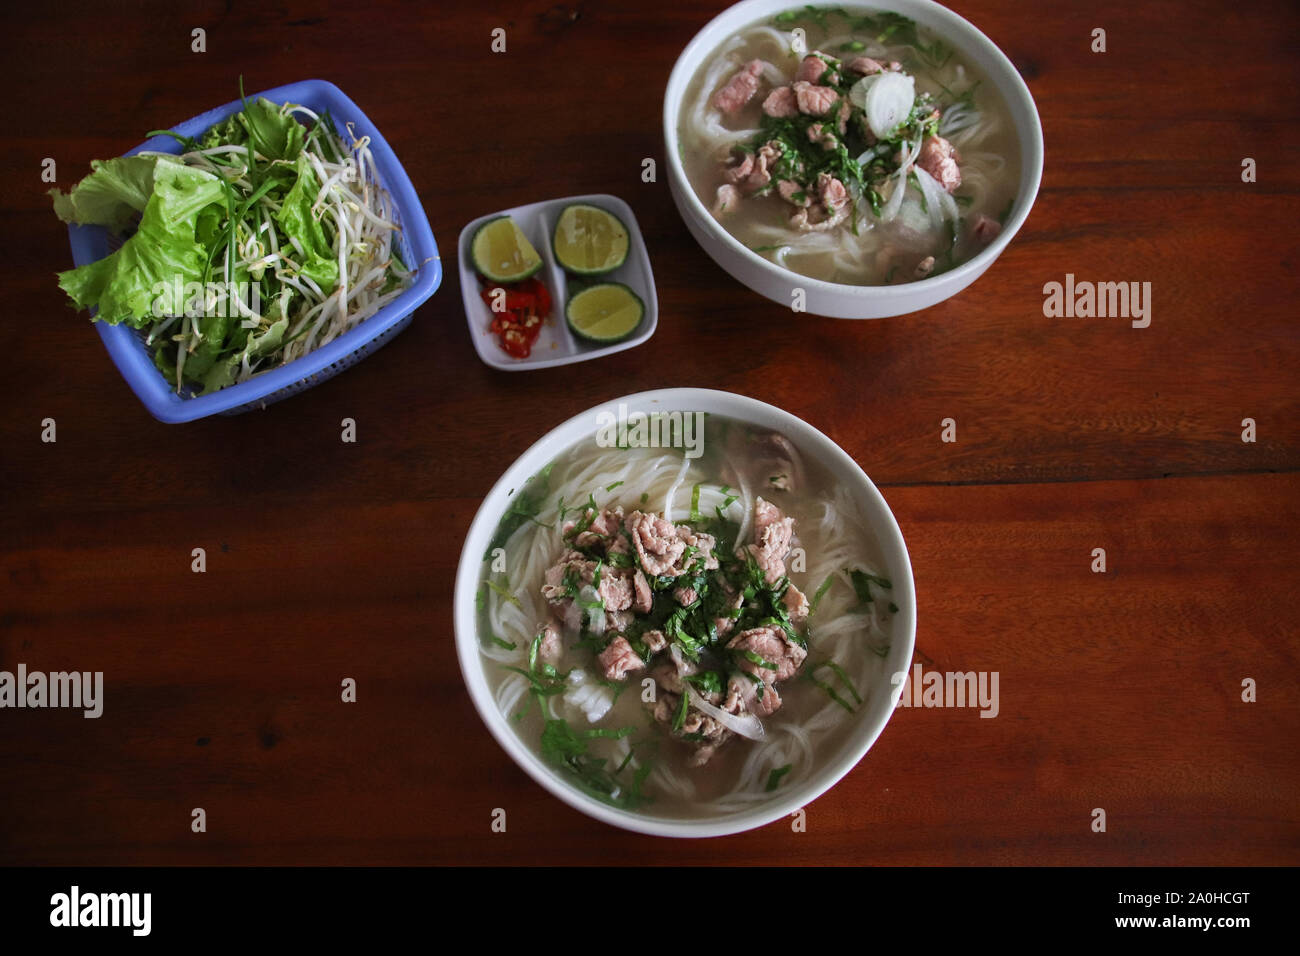 Iconic Vietnamese dish called pho bo or beef noodles soup Stock Photo